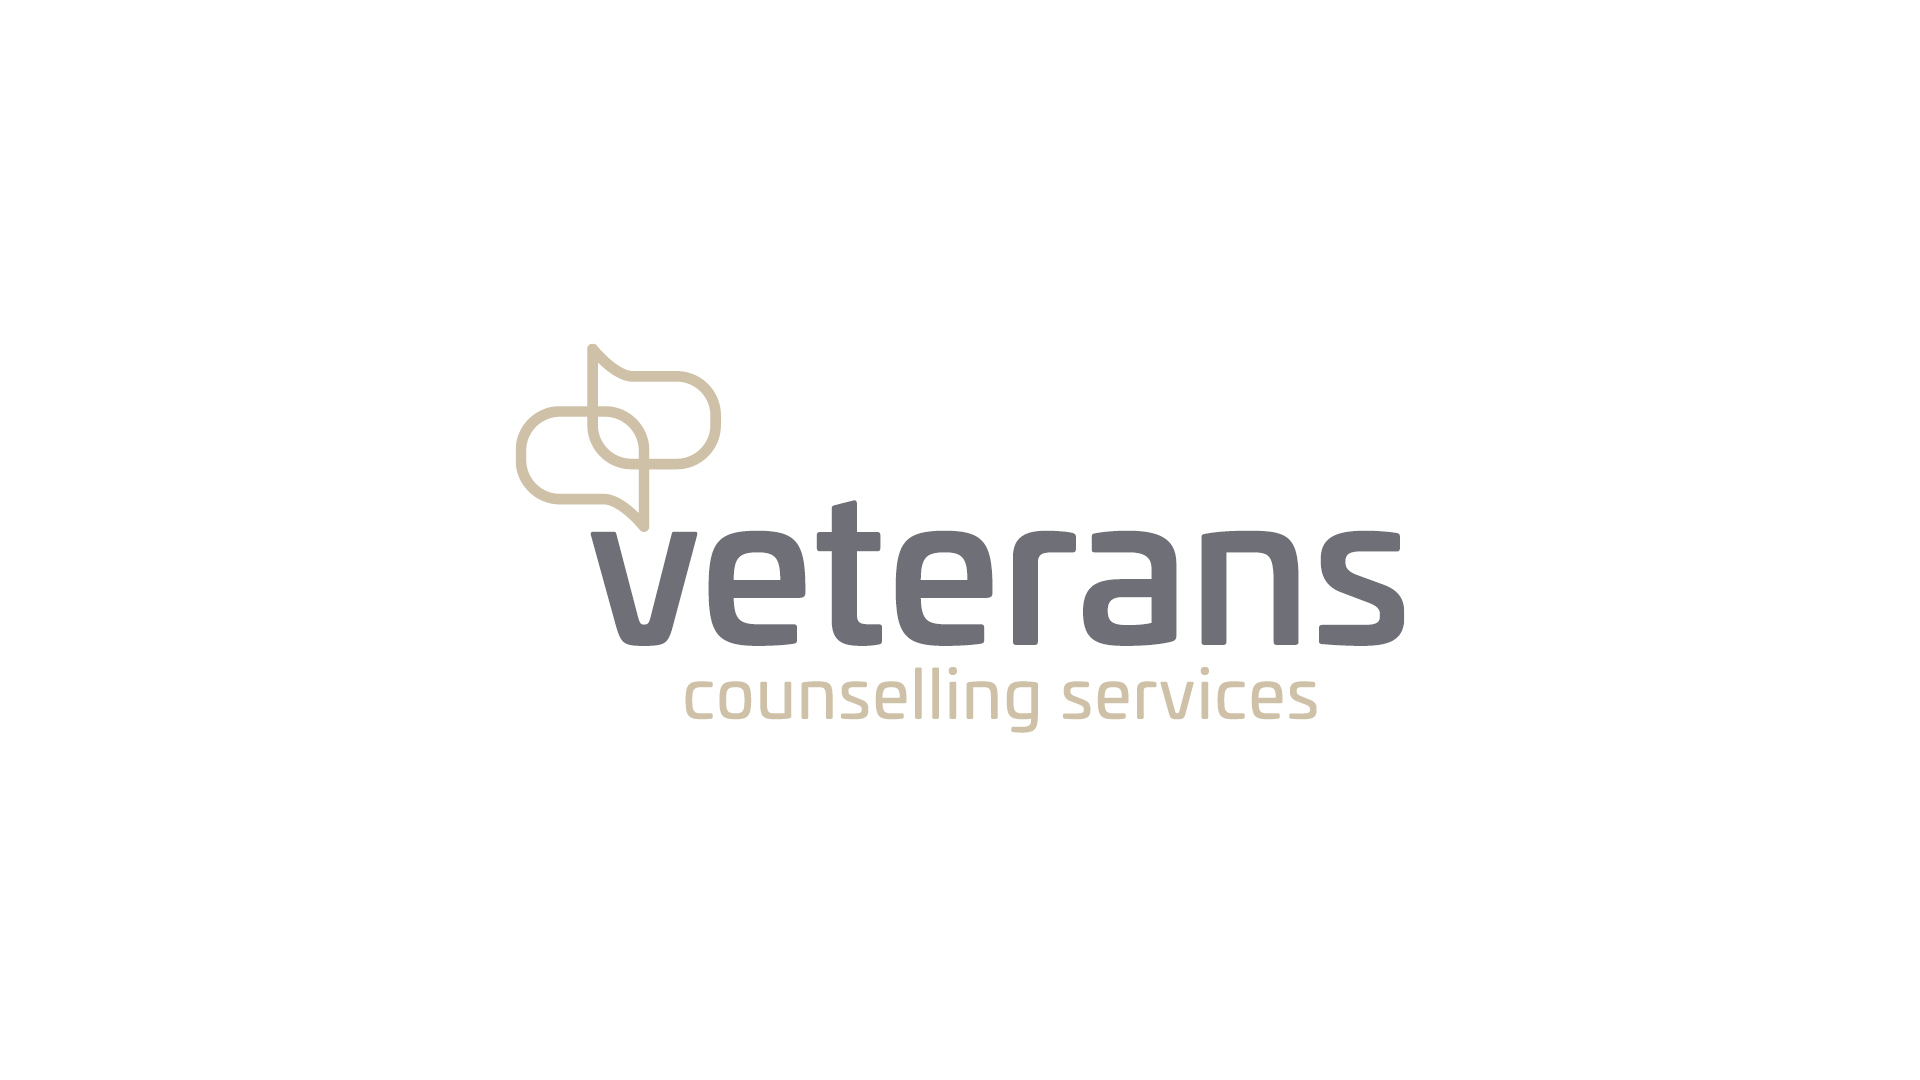 Veterans Counselling Services Logo and Brand Design - Saunders Design Group